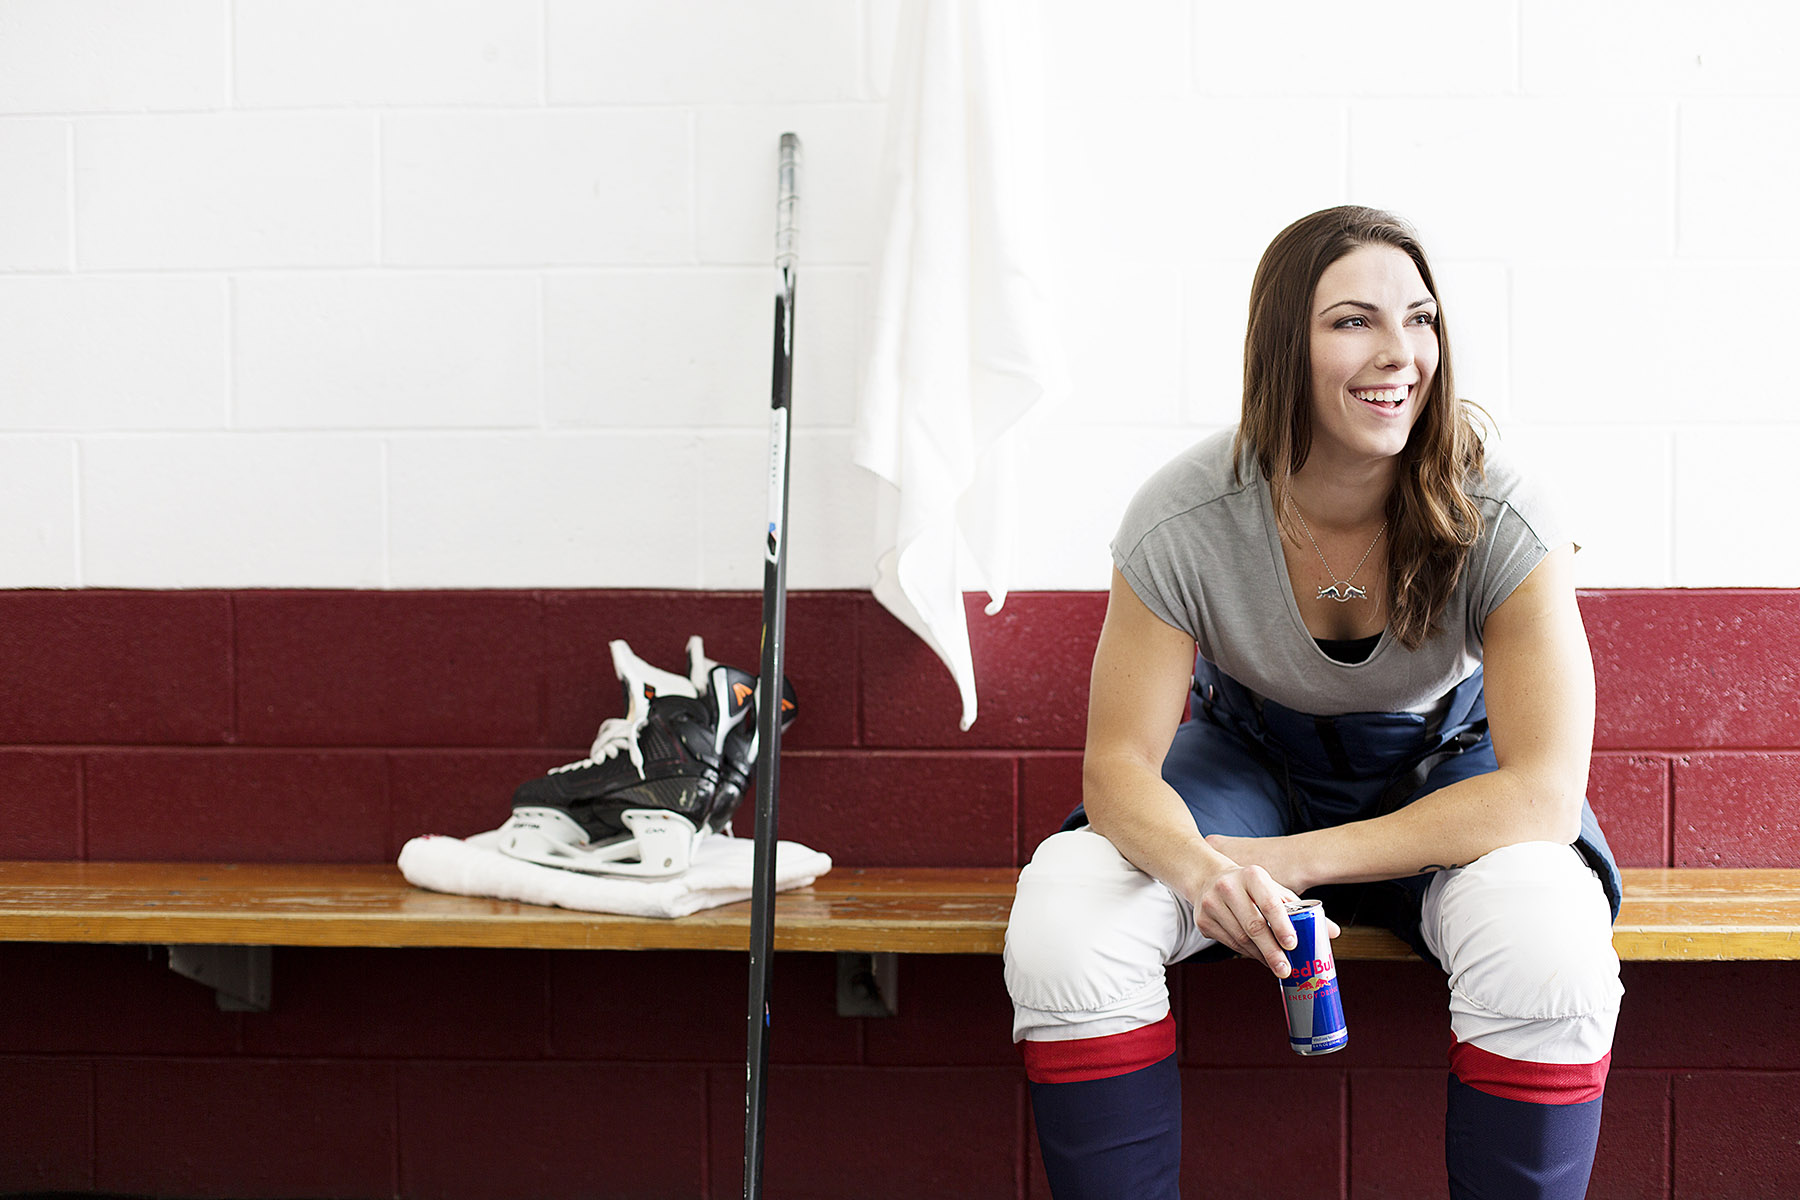 Hilary Knight by Boston based commercial athlete lifestyle photographer Brian Nevins